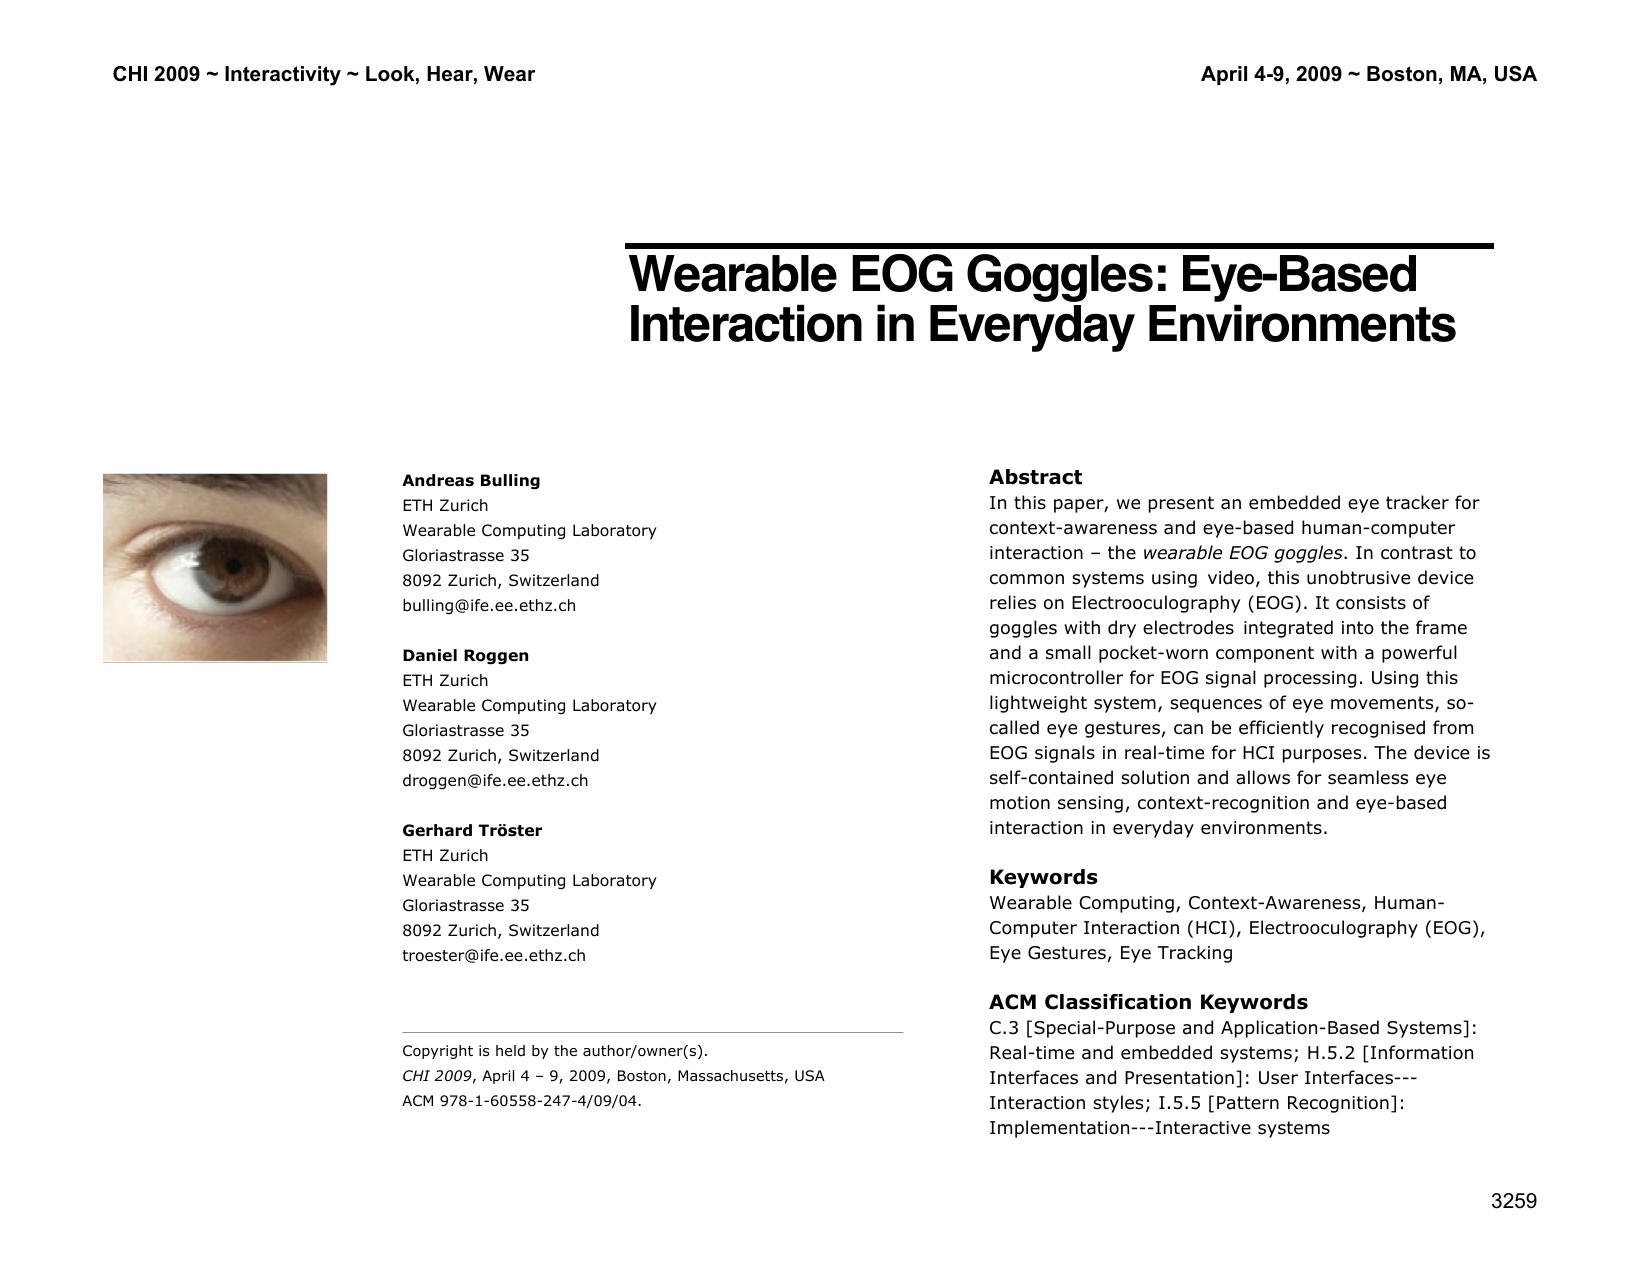 Wearable EOG Goggles: Eye-Based Interaction in Everyday Environments